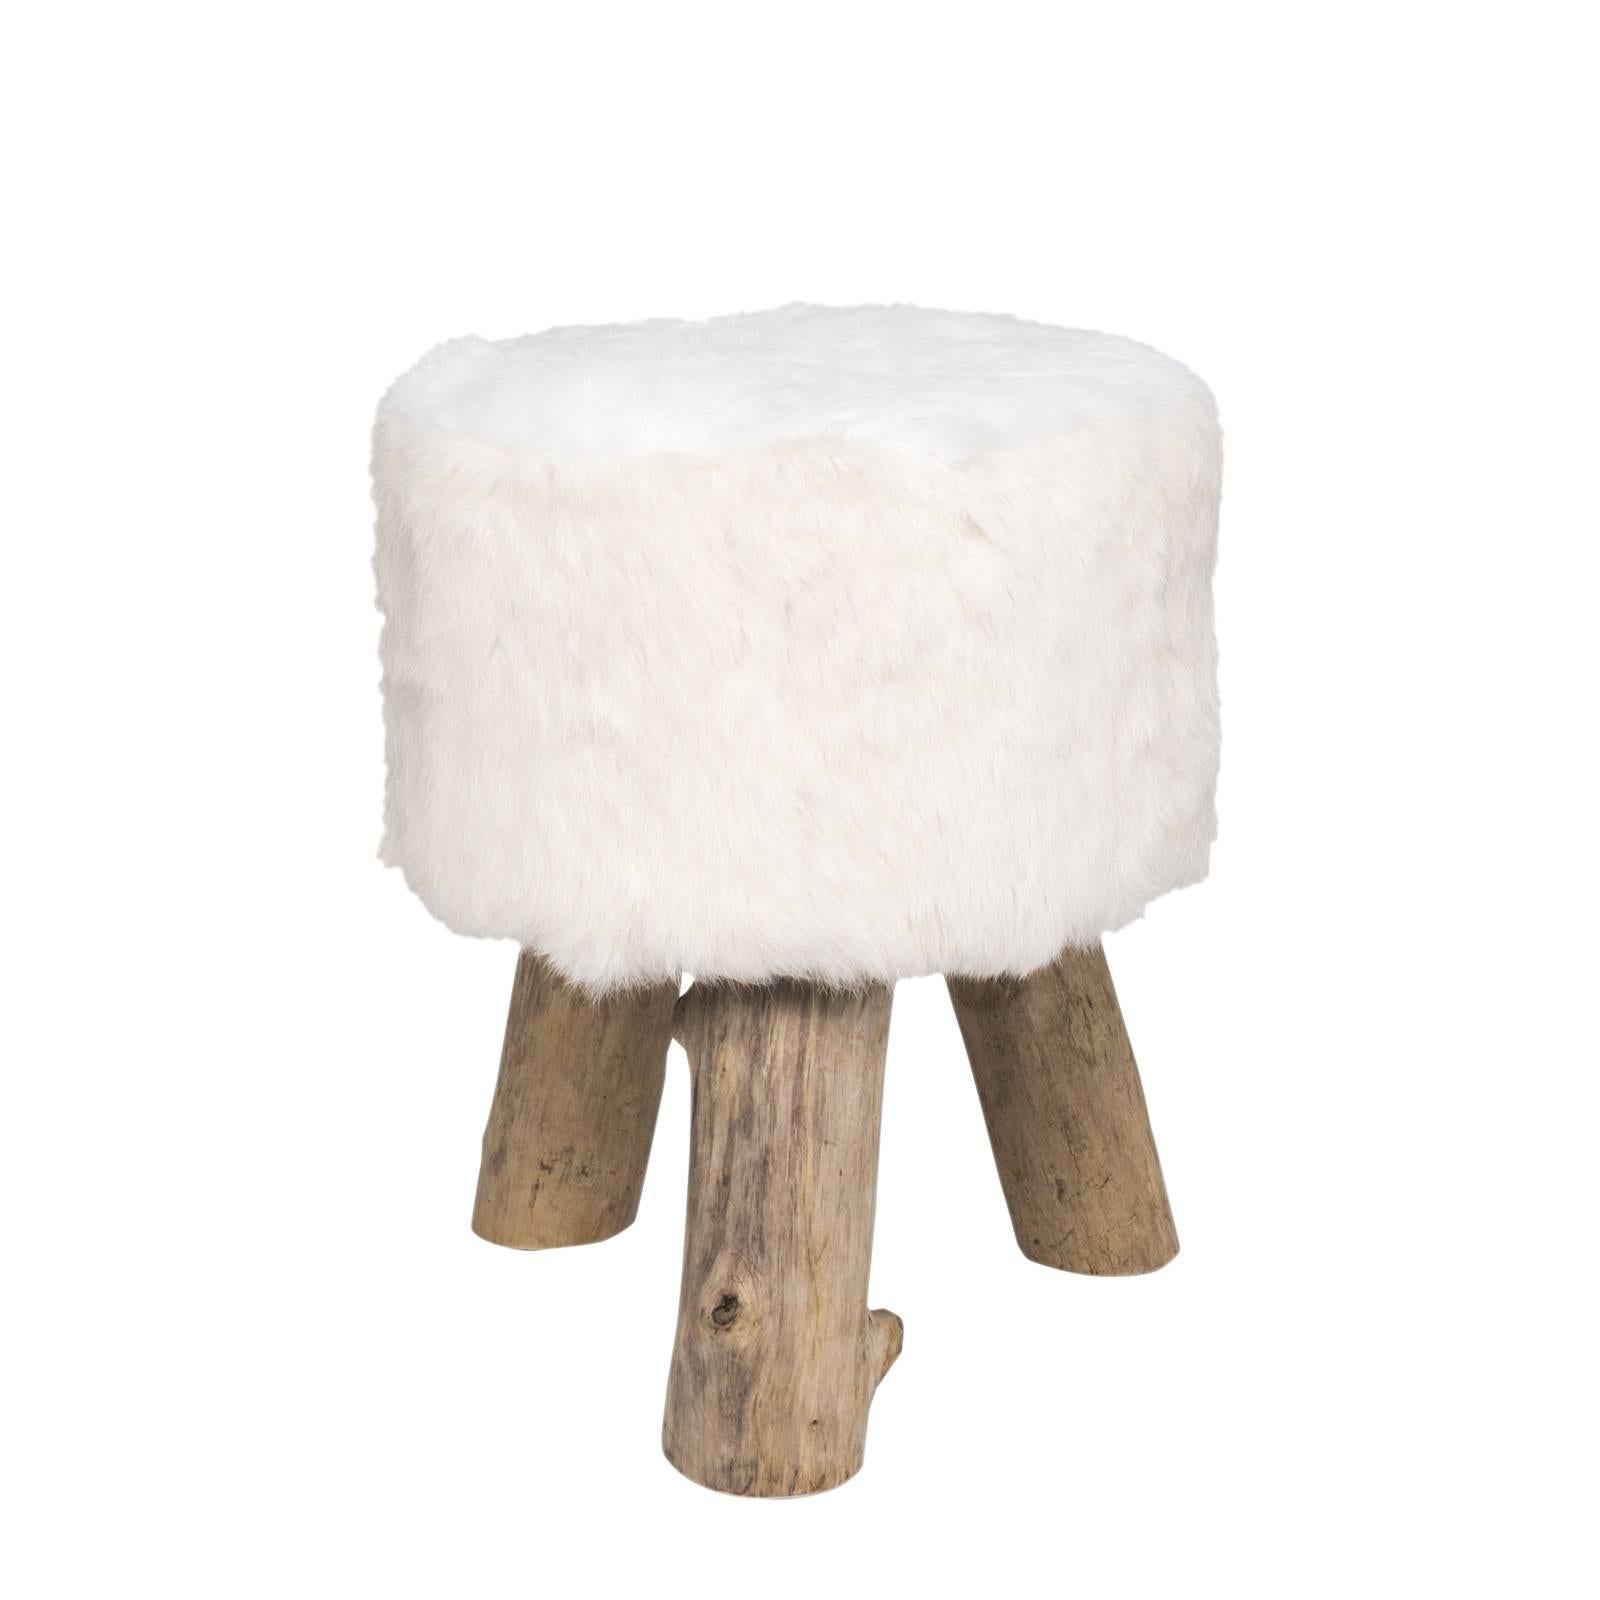 Driftwood stool with white rabbit.
Additional sizes available.
100% natural driftwood.
   